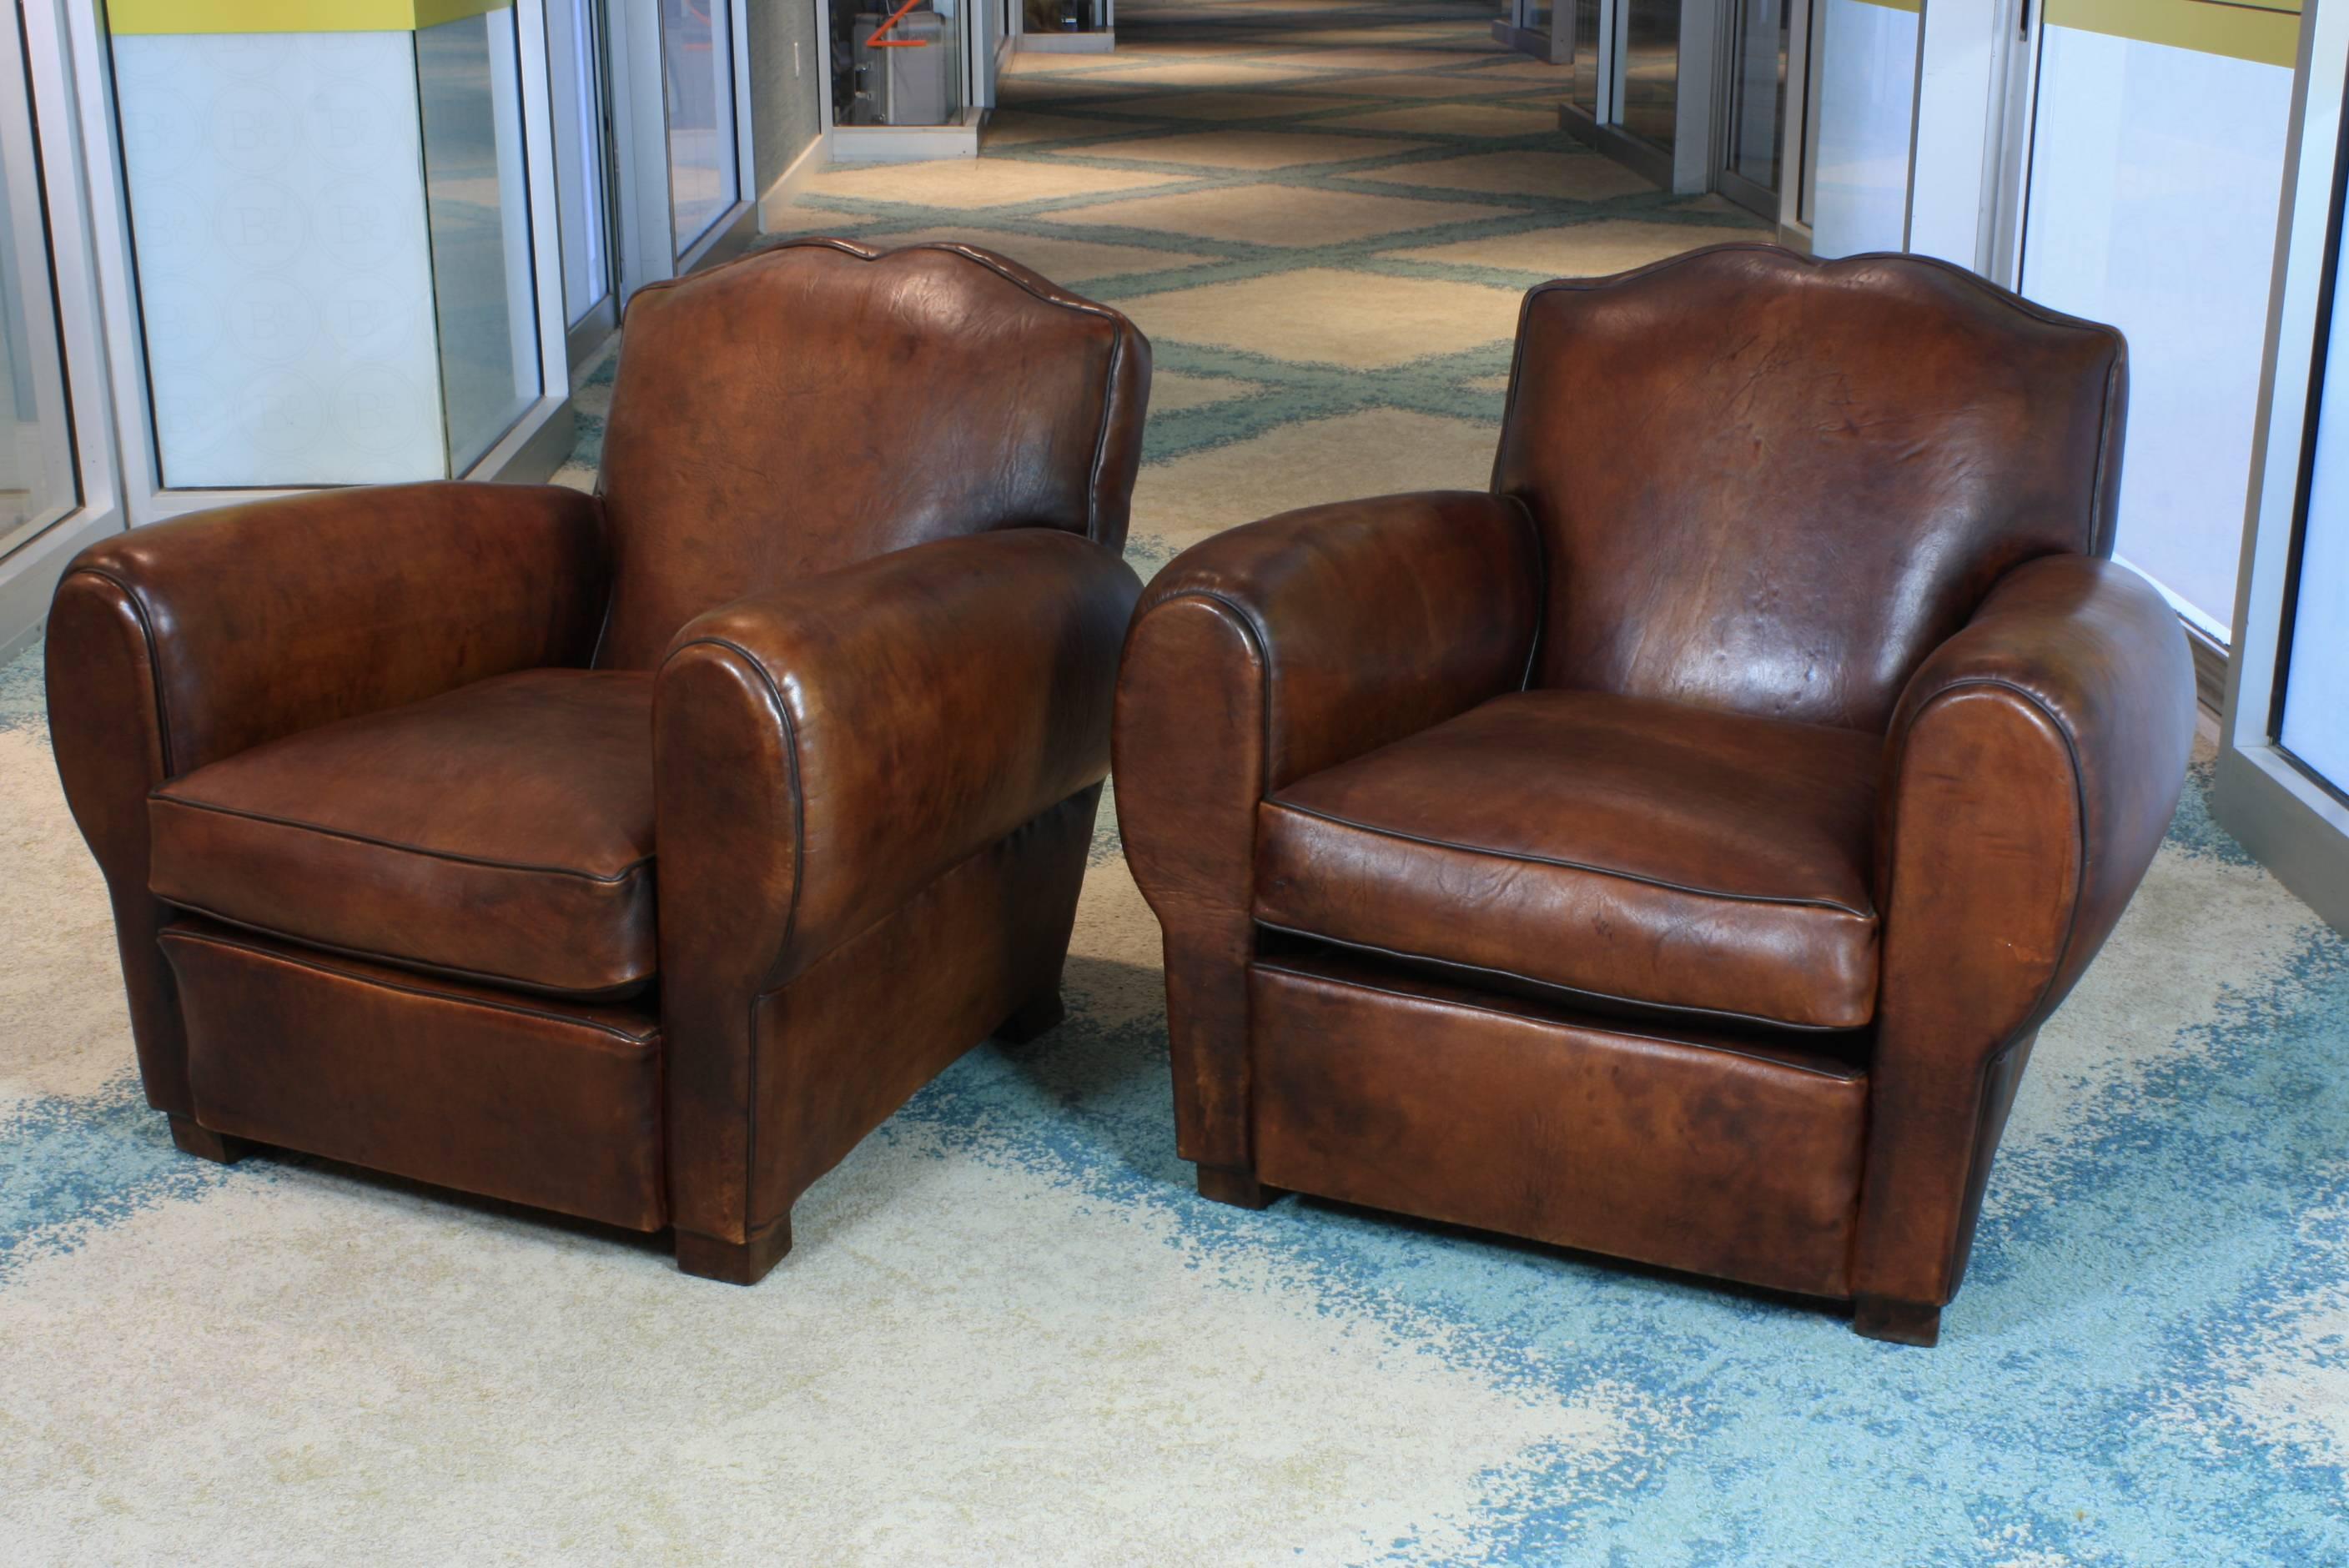 A nice compact pair of French leather club chairs, completely reconditioned and restored, with separate seat cushions (reverse side is suede.) Chairs have Classic 